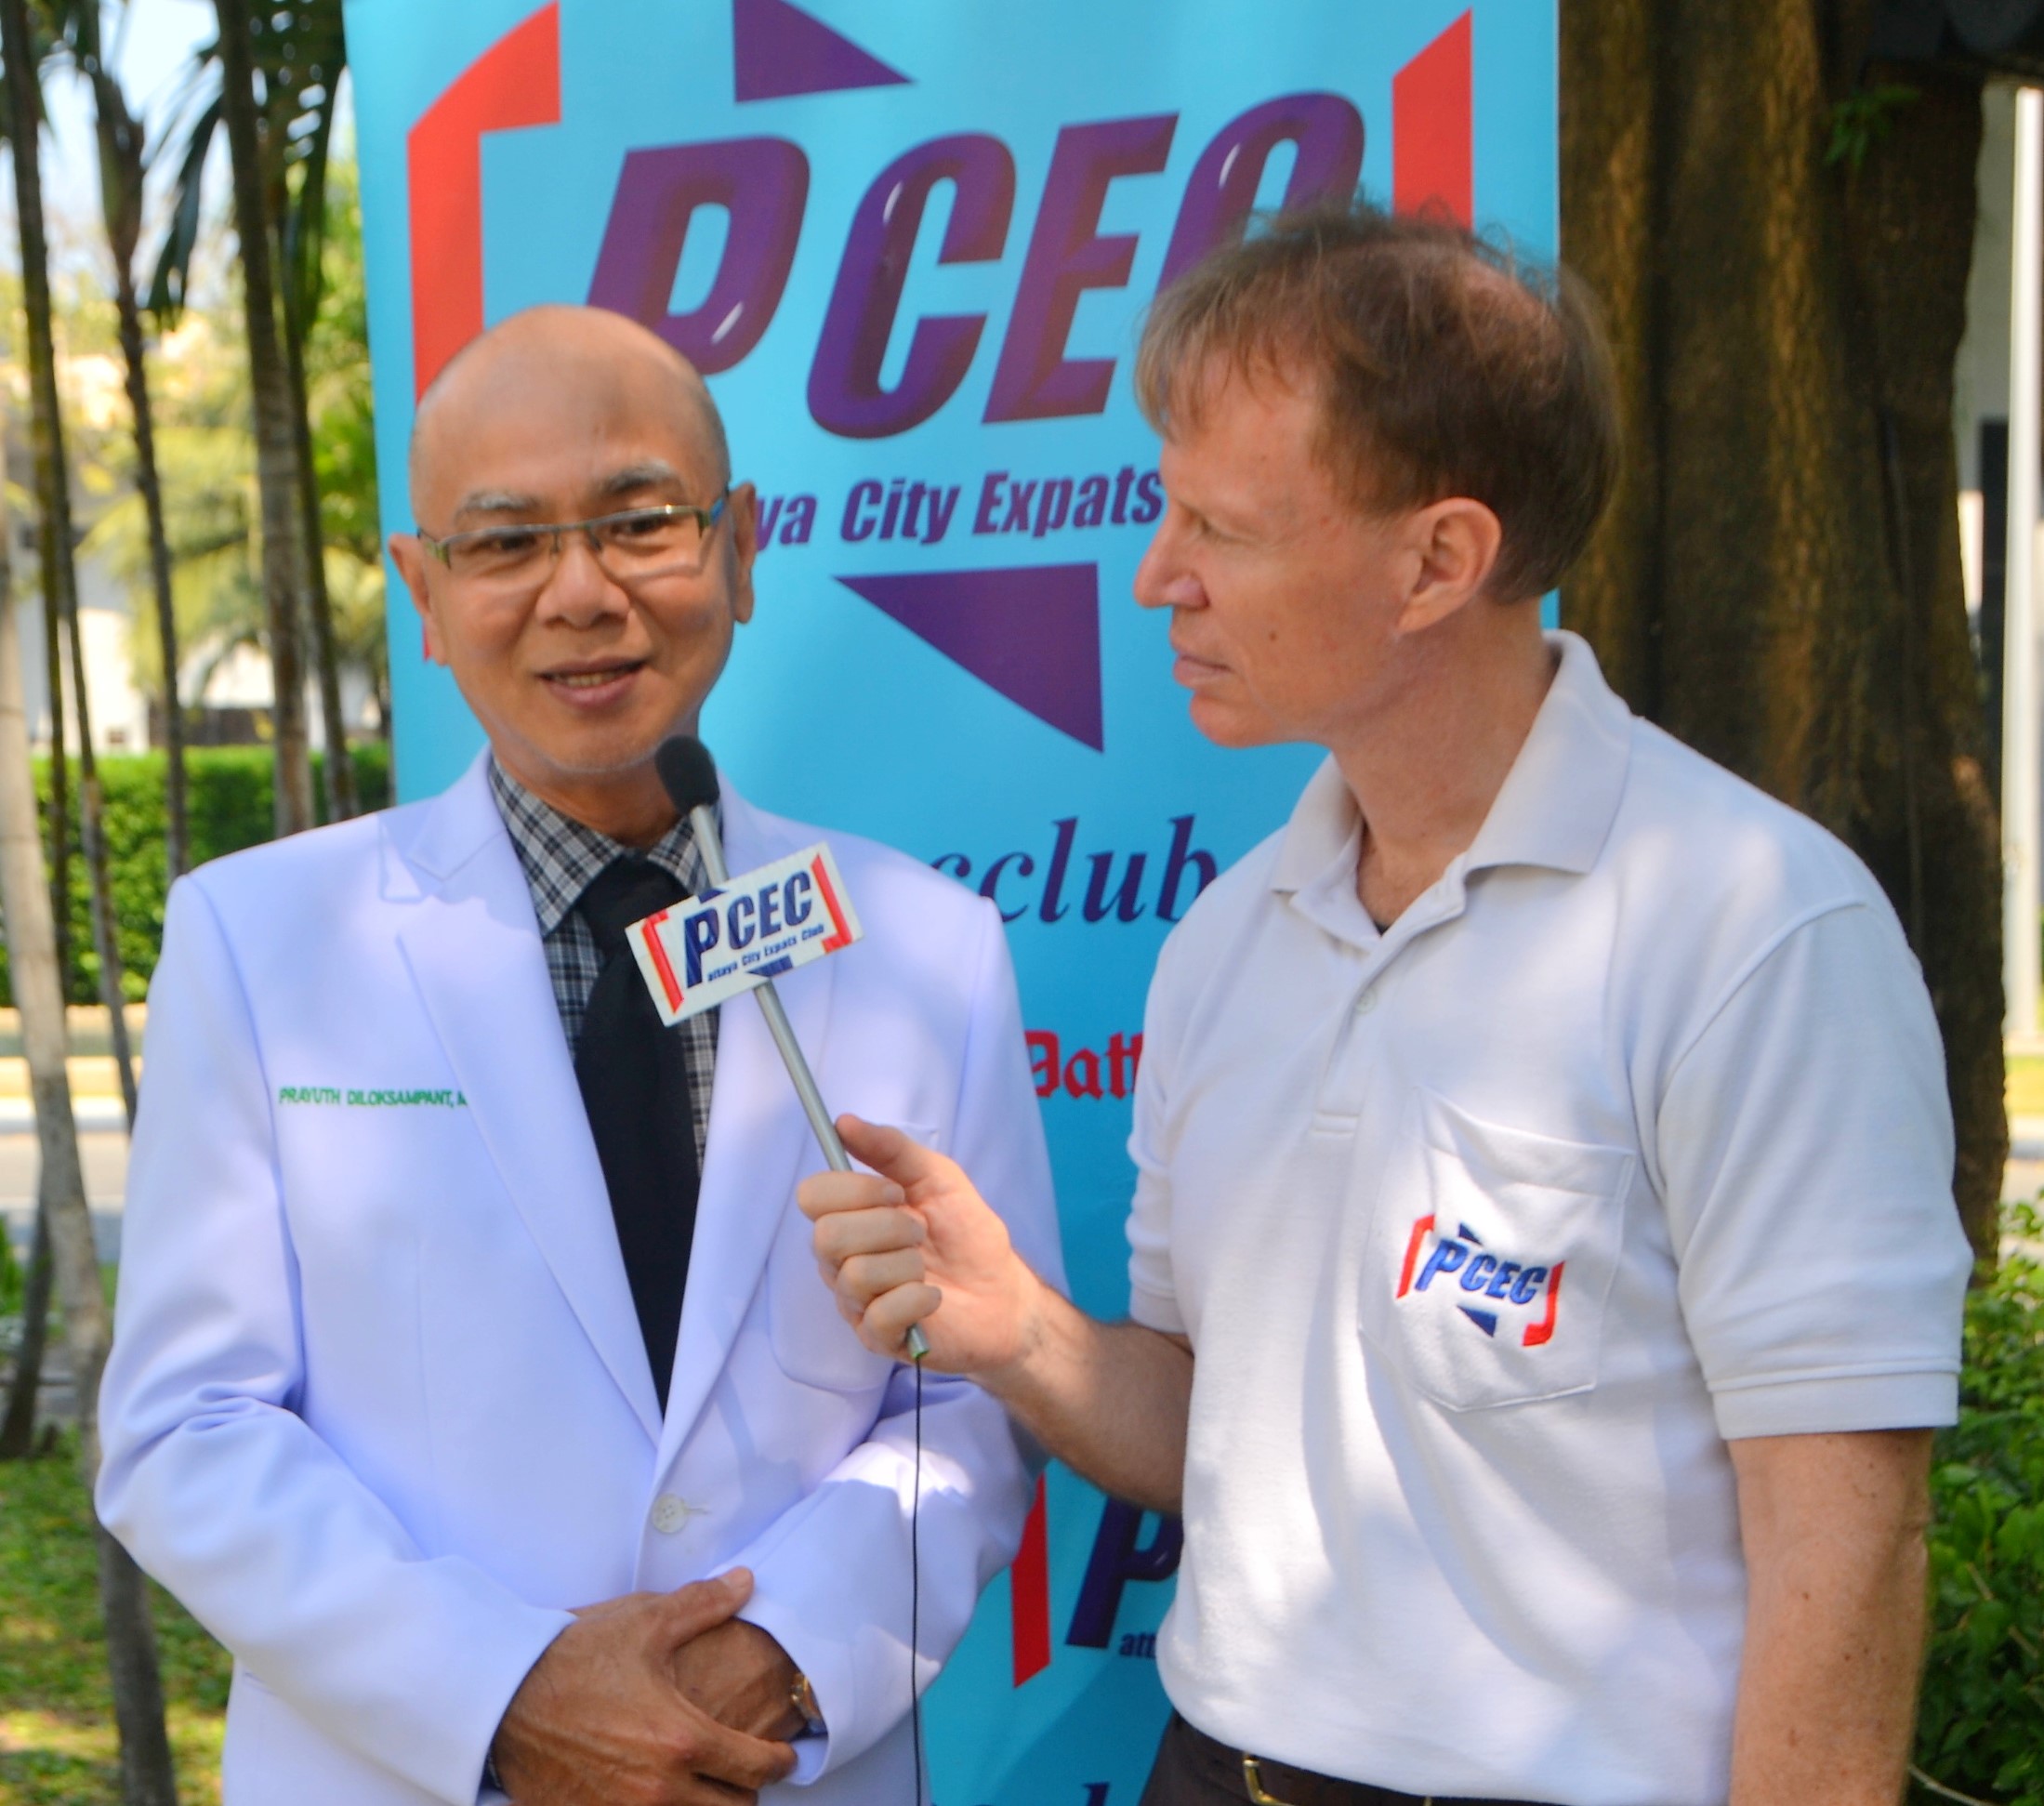 Member Ren Lexander interviews Rayuth Diloksampant, MD, about his just completed presentation to the PCEC. To view the video, visit https://www.youtube.com/watch?v=lOwUH09DbKE&t=4s.